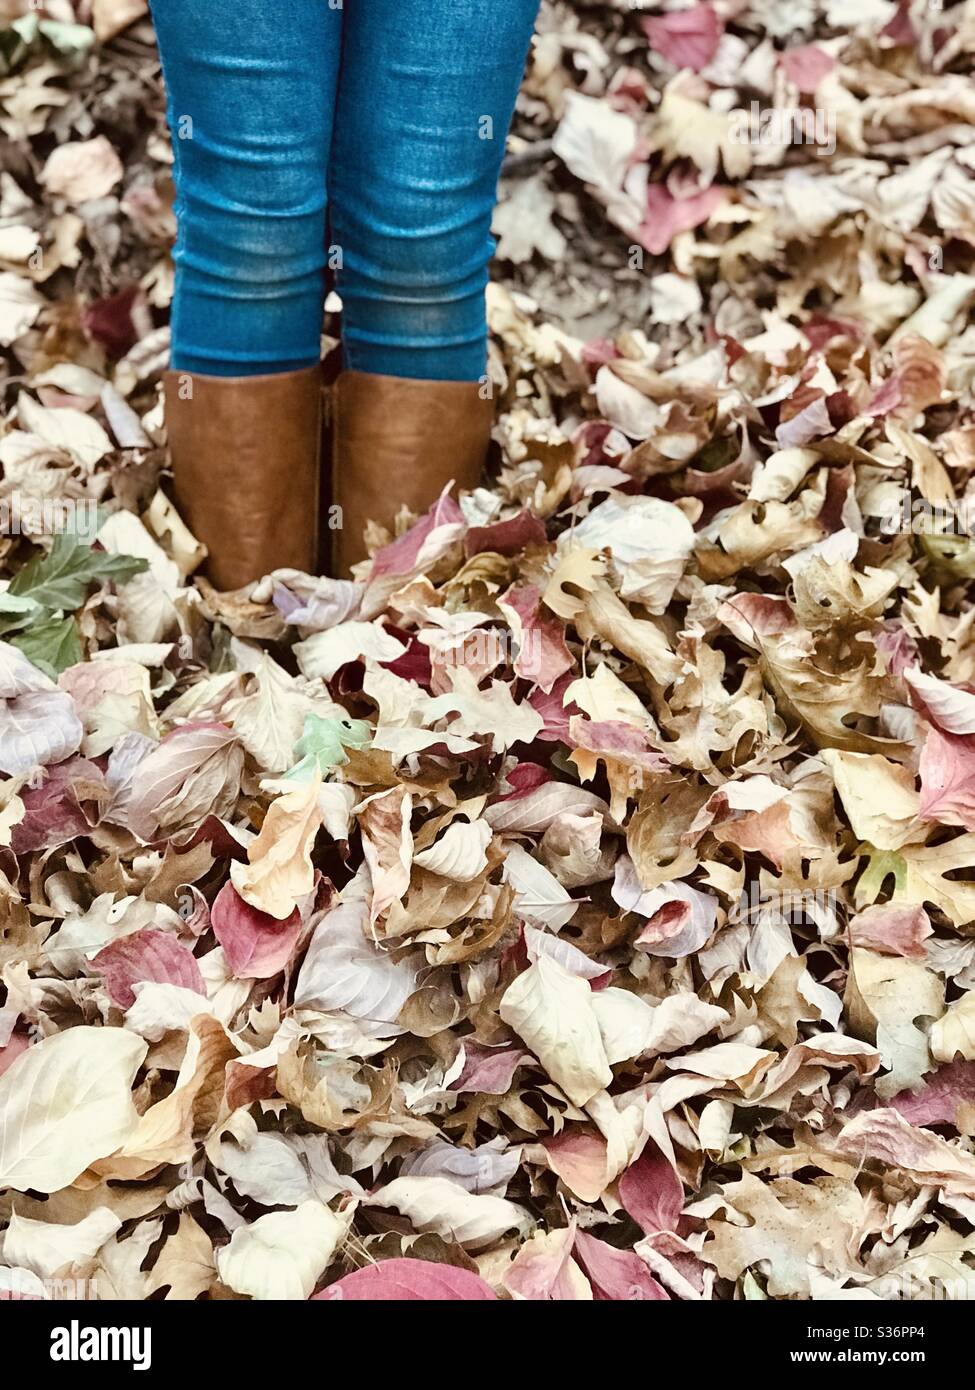 A girl with jeans and brown boots standing in a pile of fall leaves on the ground. Stock Photo